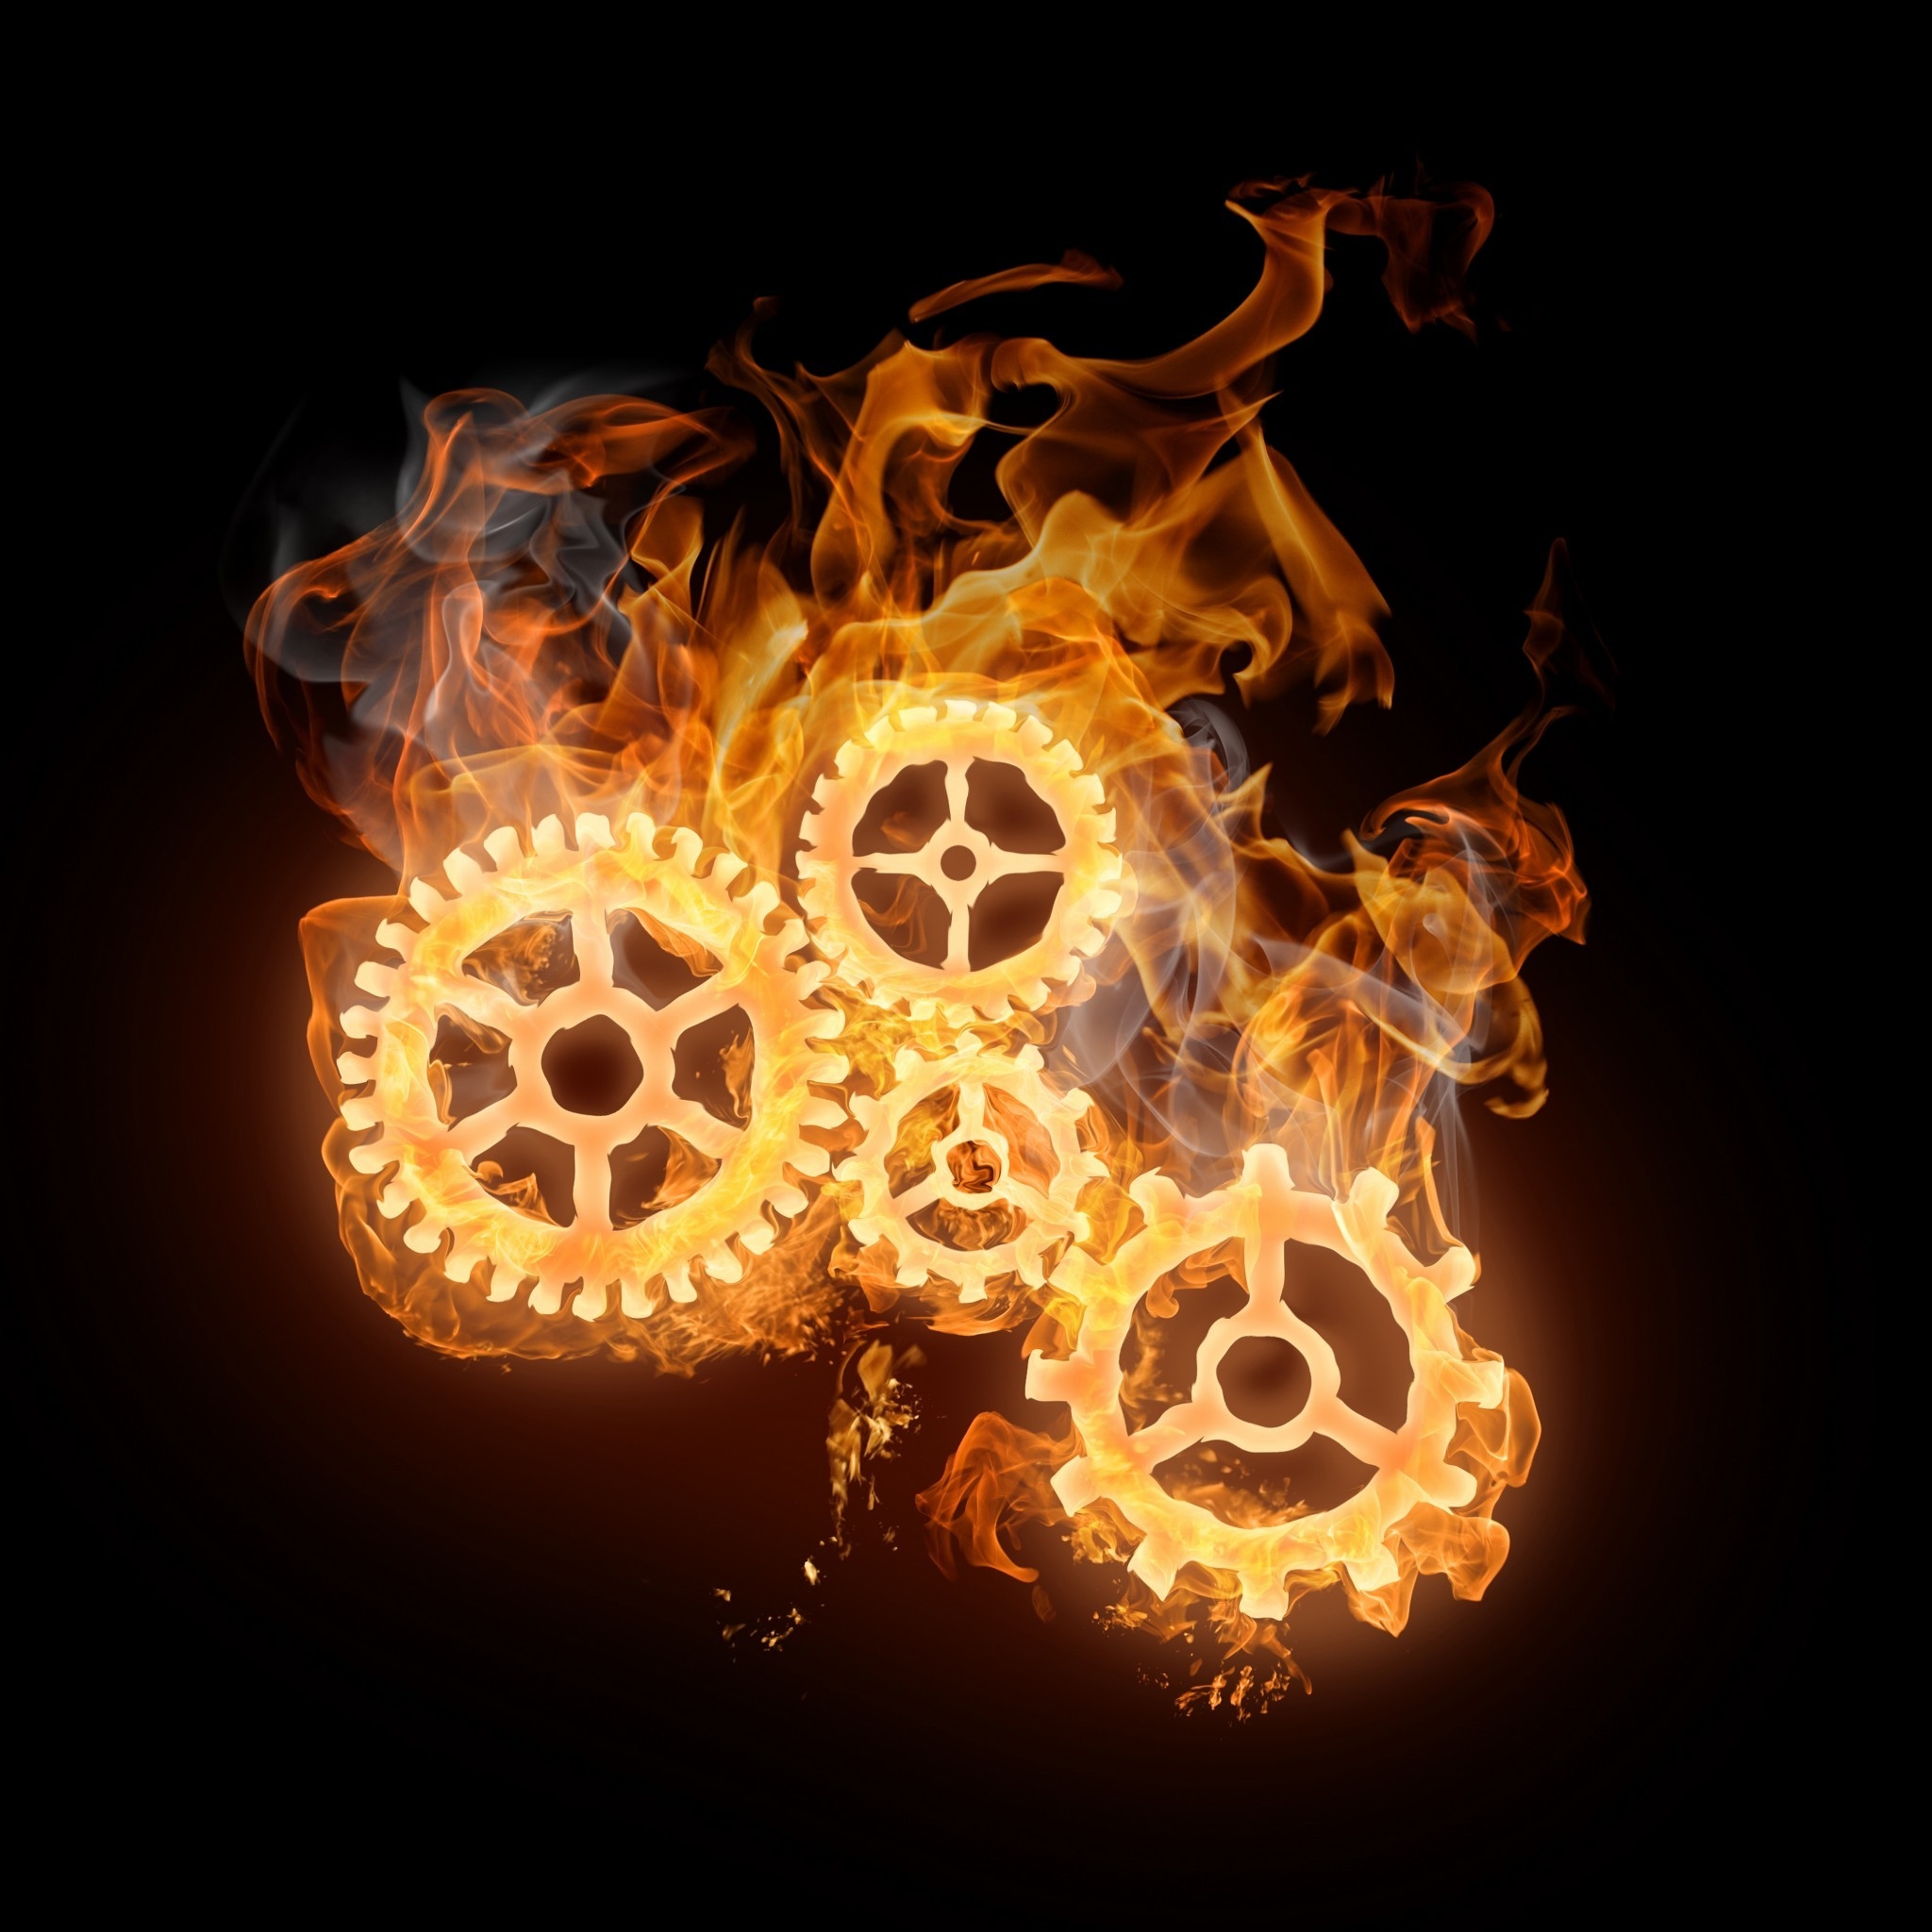 Wheels on Fire for 2048 x 2048 New iPad resolution